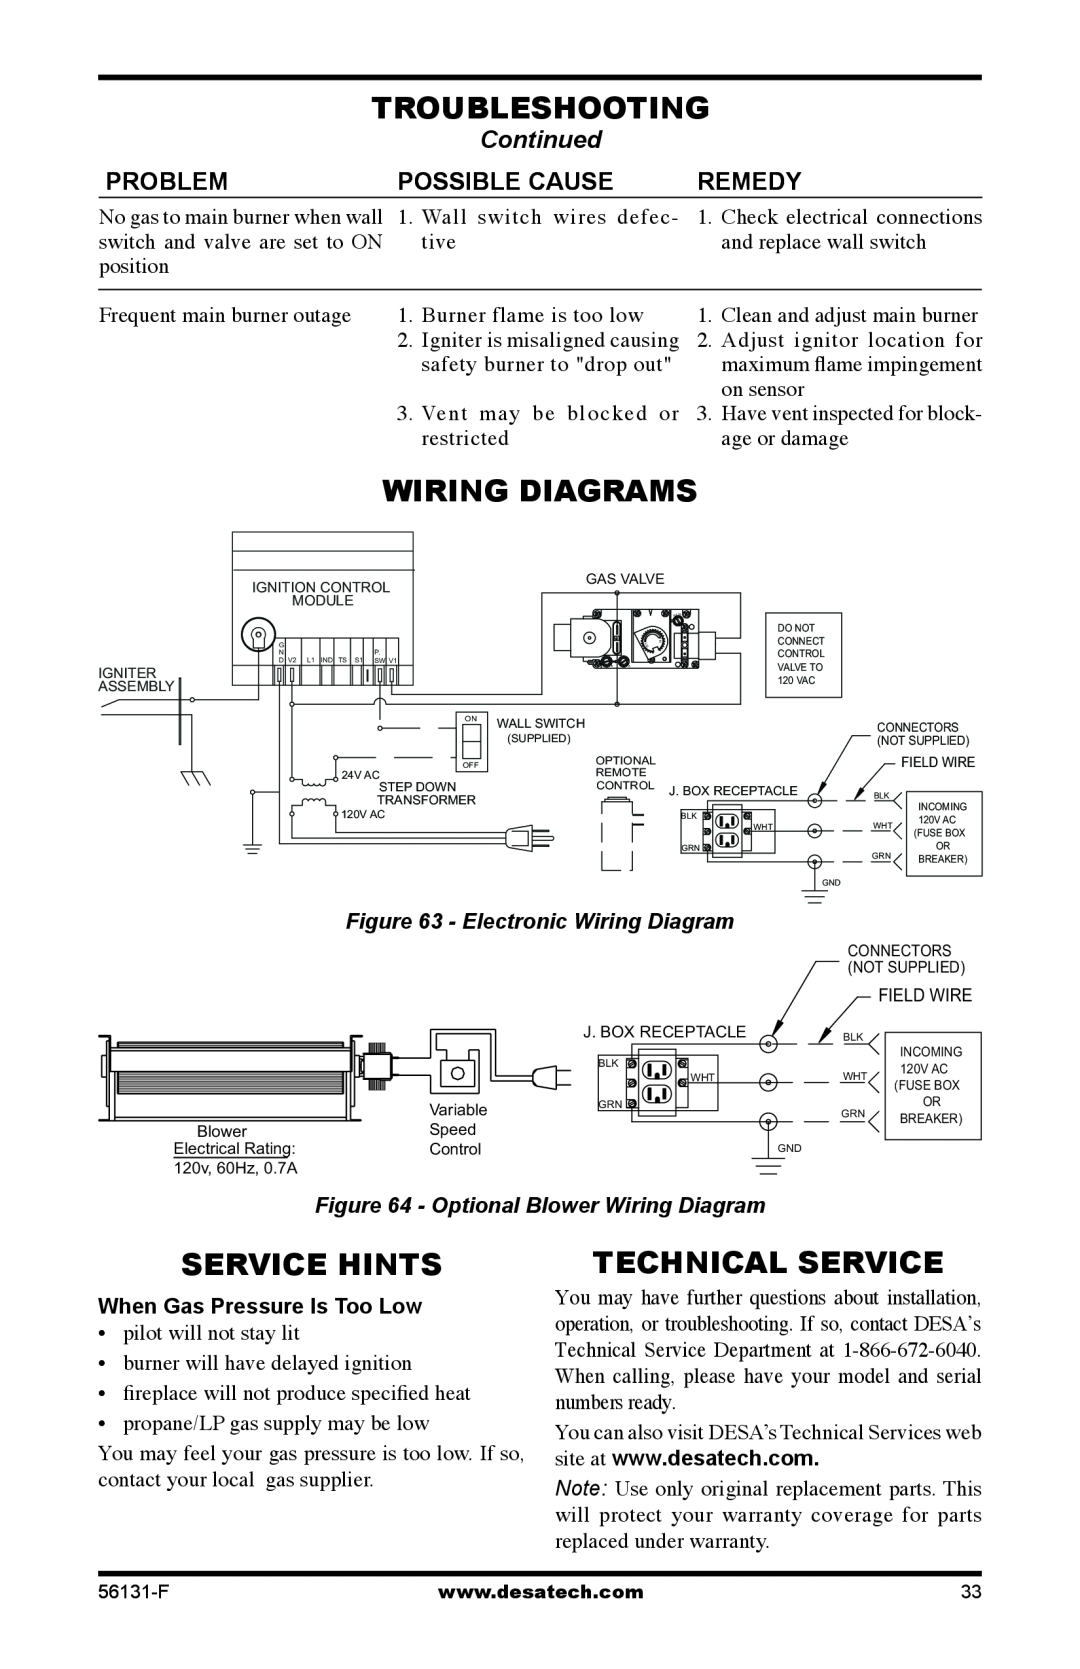 Desa TPNPA-A Troubleshooting, Wiring Diagrams, Service Hints, Technical Service, Continued, Electronic Wiring Diagram 